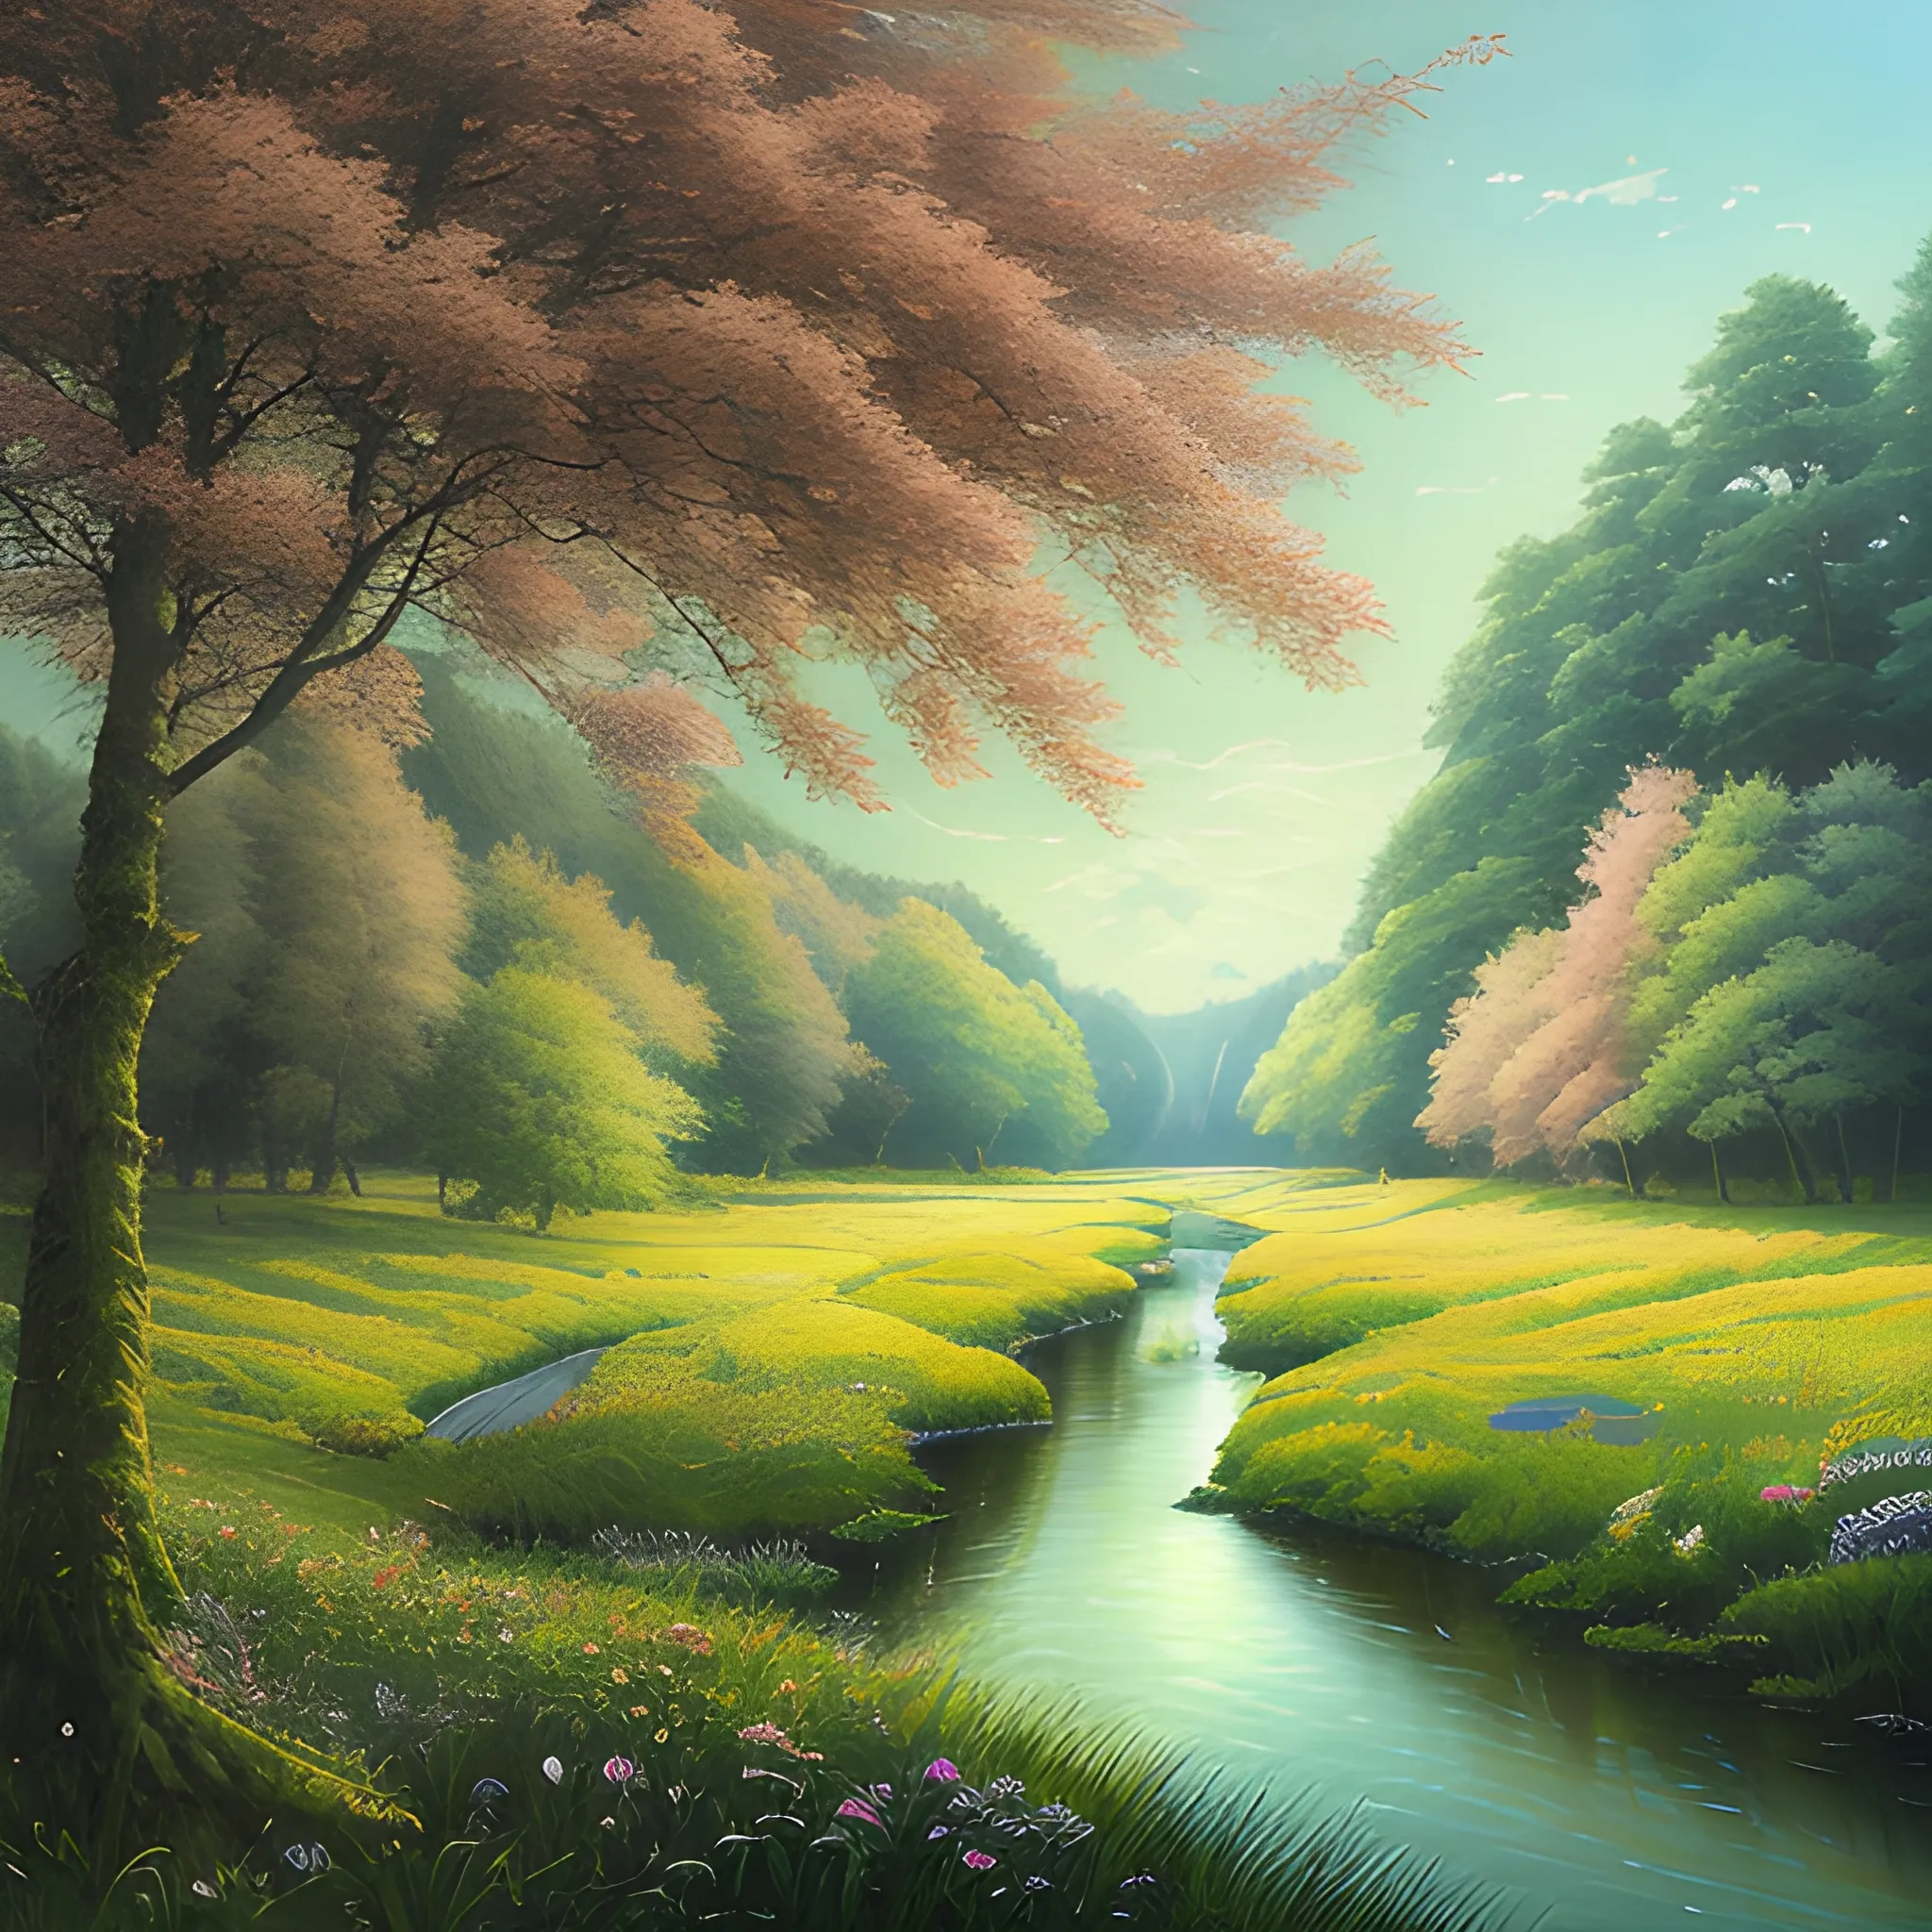 Akihito Yoshida oil painting style, highly detailed, free, fantasy, beautiful nature, with trees and a wide meadow belgian river, Trippy